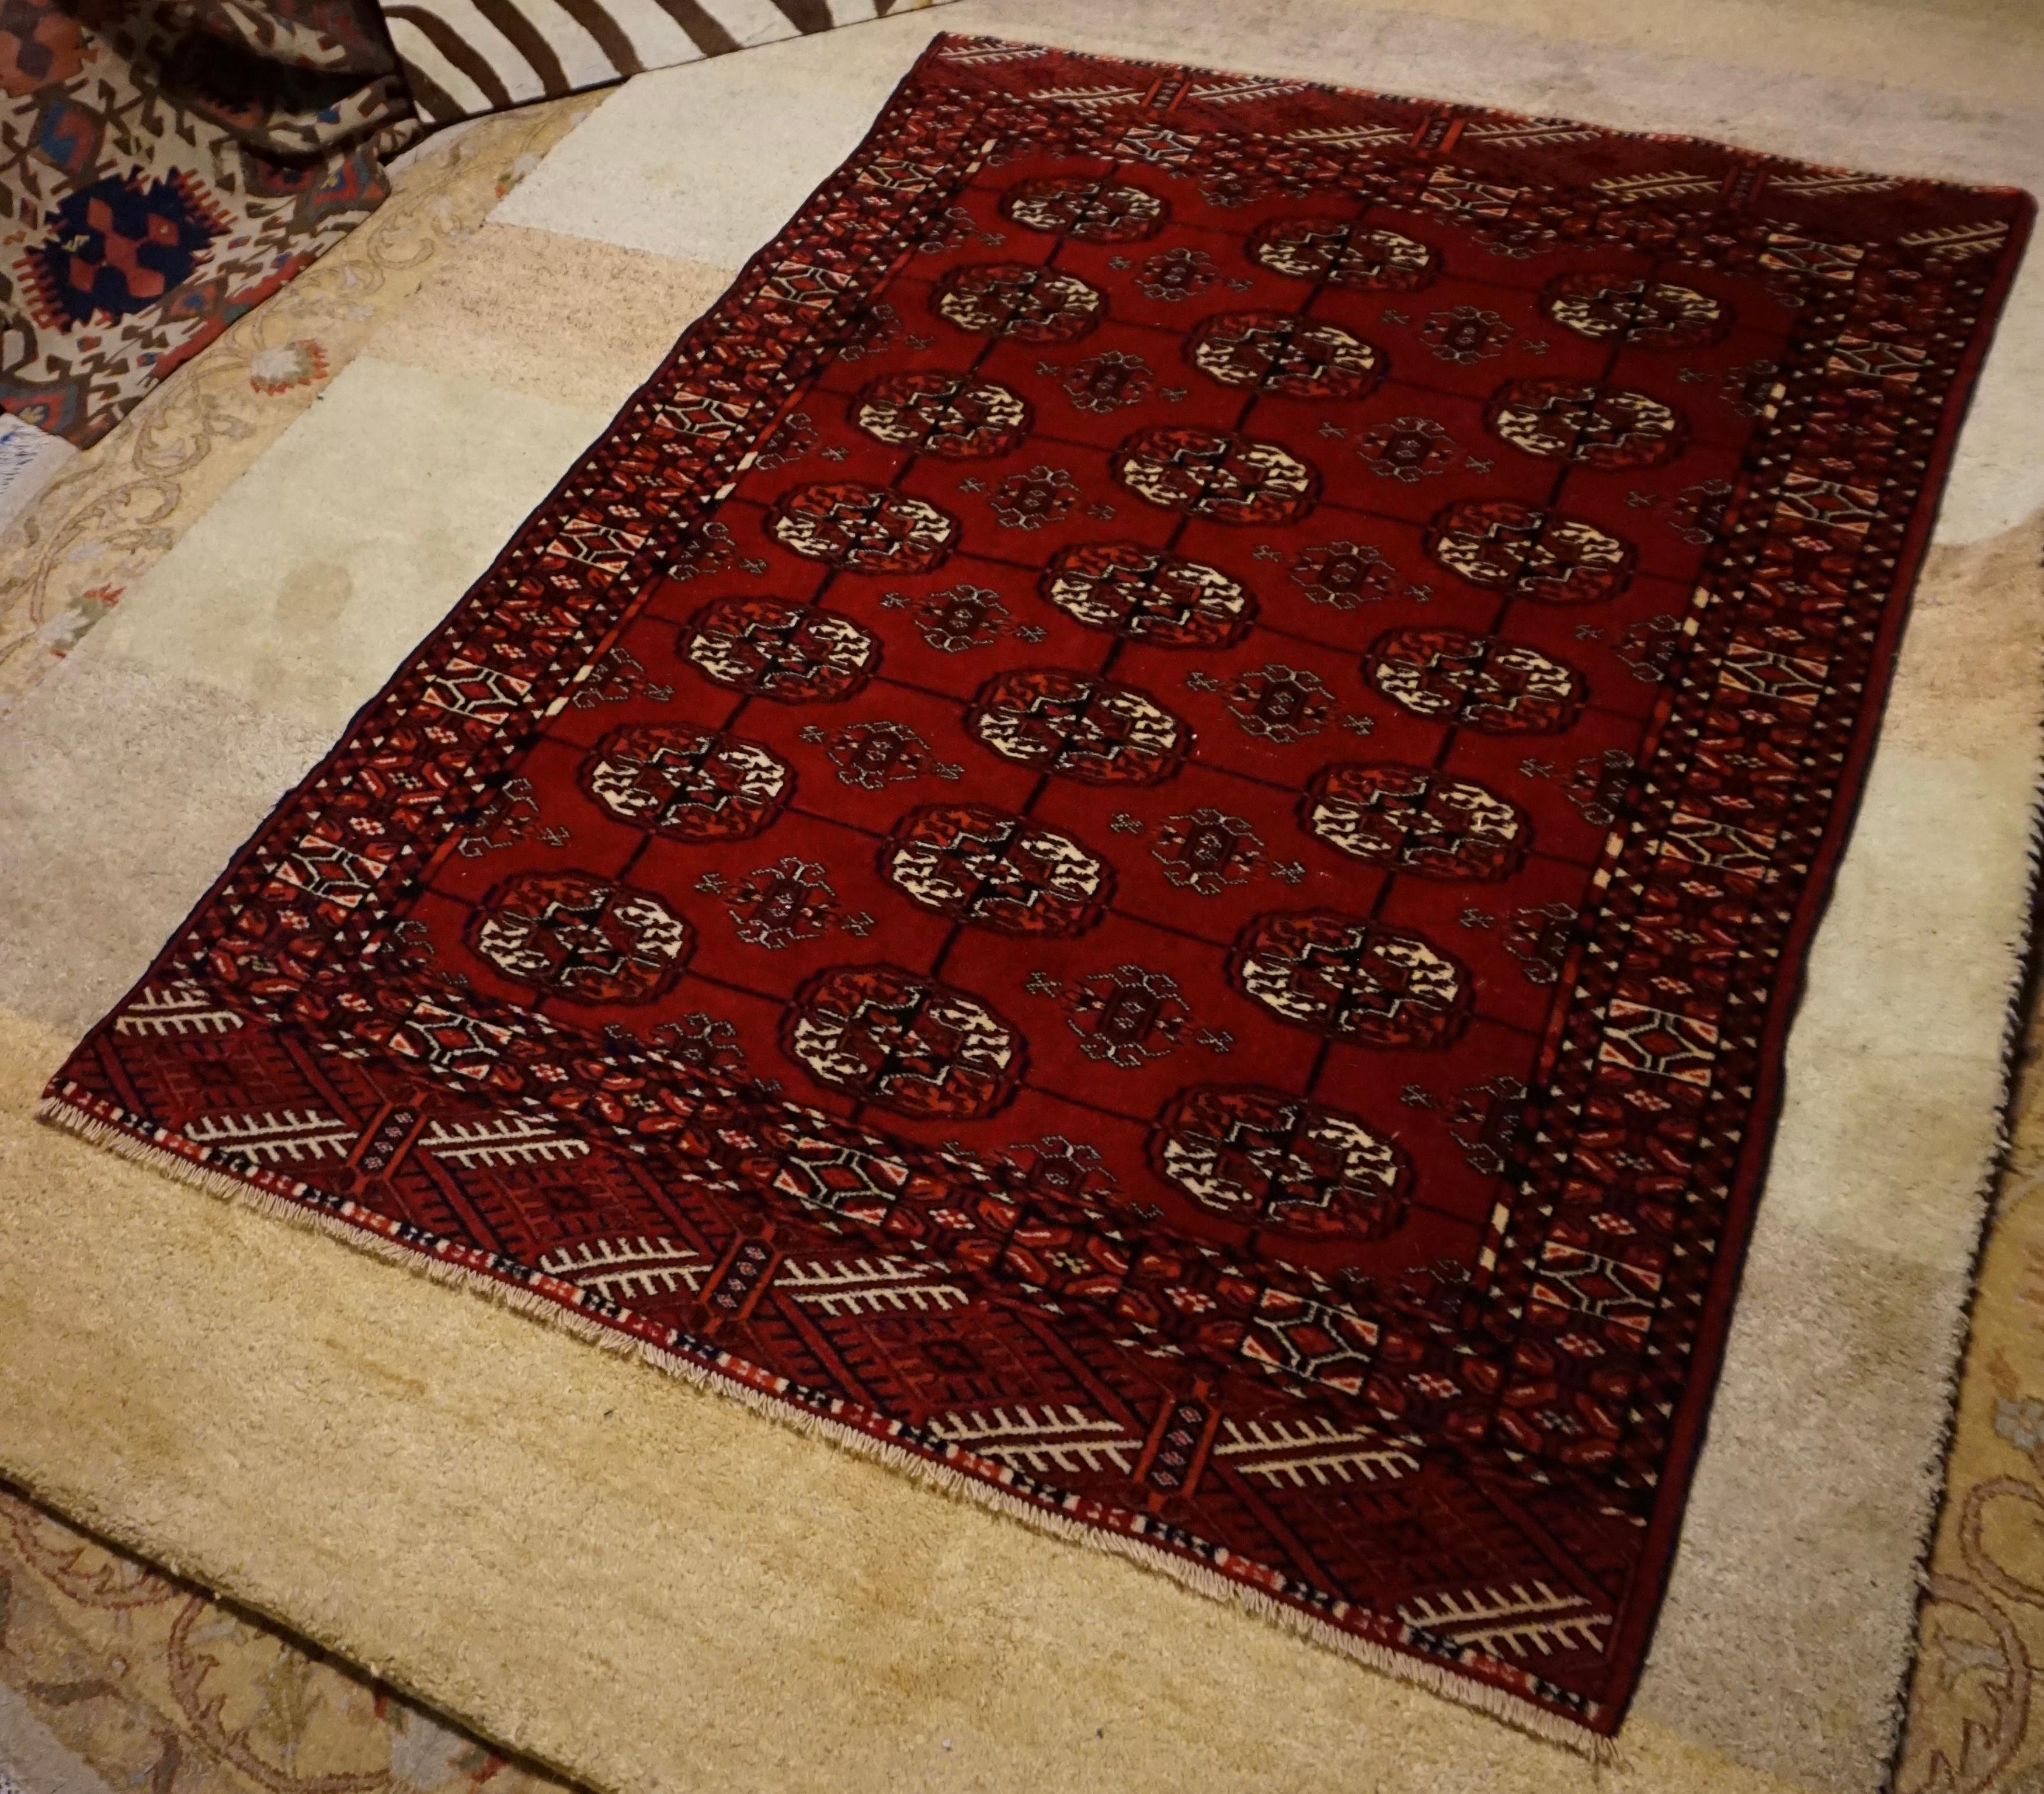 Traditional Turkomen Bokhara carpet in deep reds with elephant's foot pattern. Finely knotted and in good overall condition despite minor pile wear,

circa 1930s.